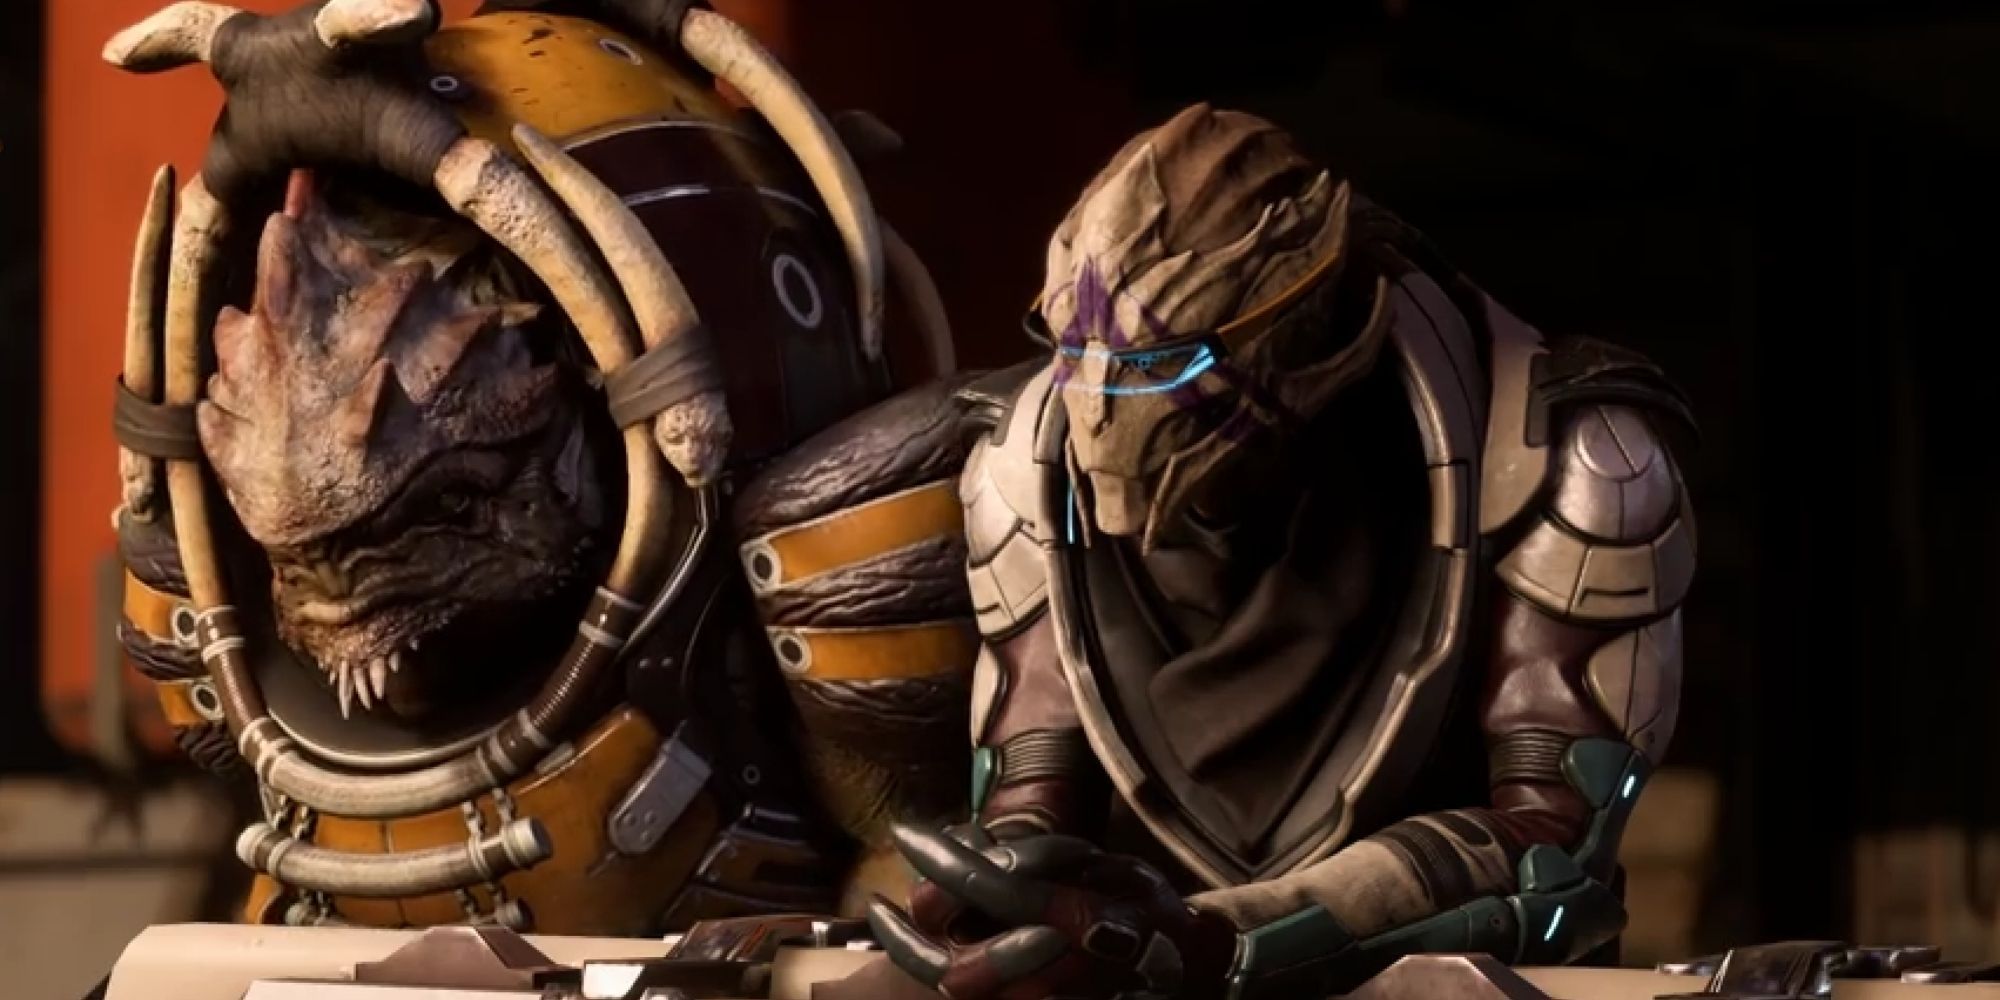 Mass Effect Andromeda - Vetra and Drack standing side-by-side